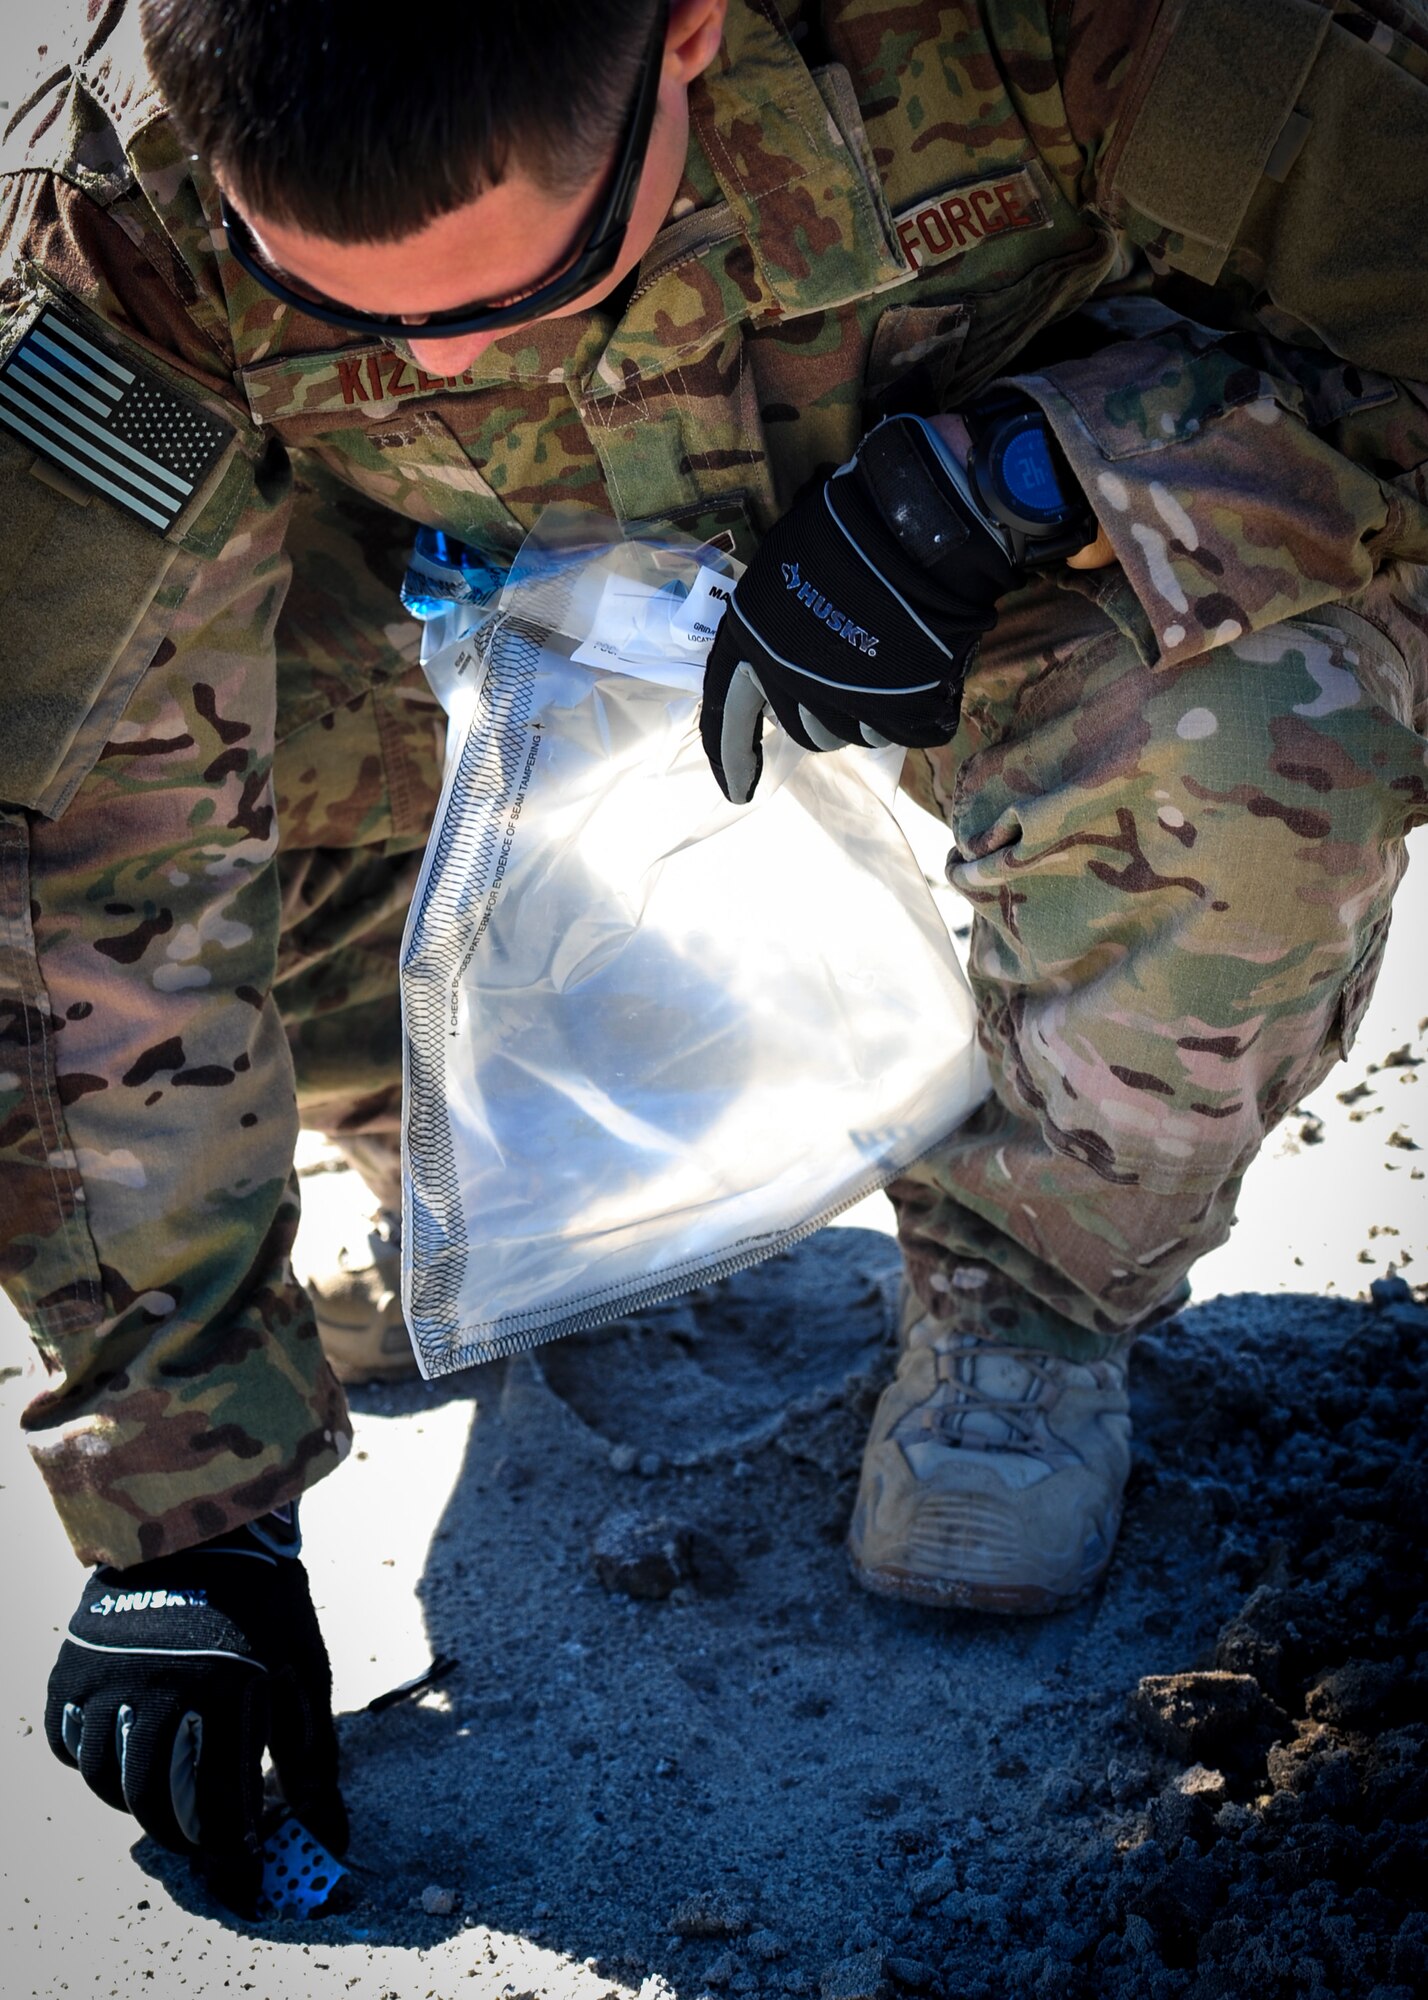 Senior Airman Nathaniel Kizer, an explosive ordnance disposal journeyman with the 1st Special Operations Civil Engineer Squadron, collects a cellphone fragment for evidence during  post-blast analysis at Hurlburt Field, Fla., Nov. 19, 2015. A Post-blast analysis takes place when an improvised explosive device detonates and EOD Airmen arrive on scene to determine what happened. (U.S. Air Force photo by Senior Airman Meagan Schutter)